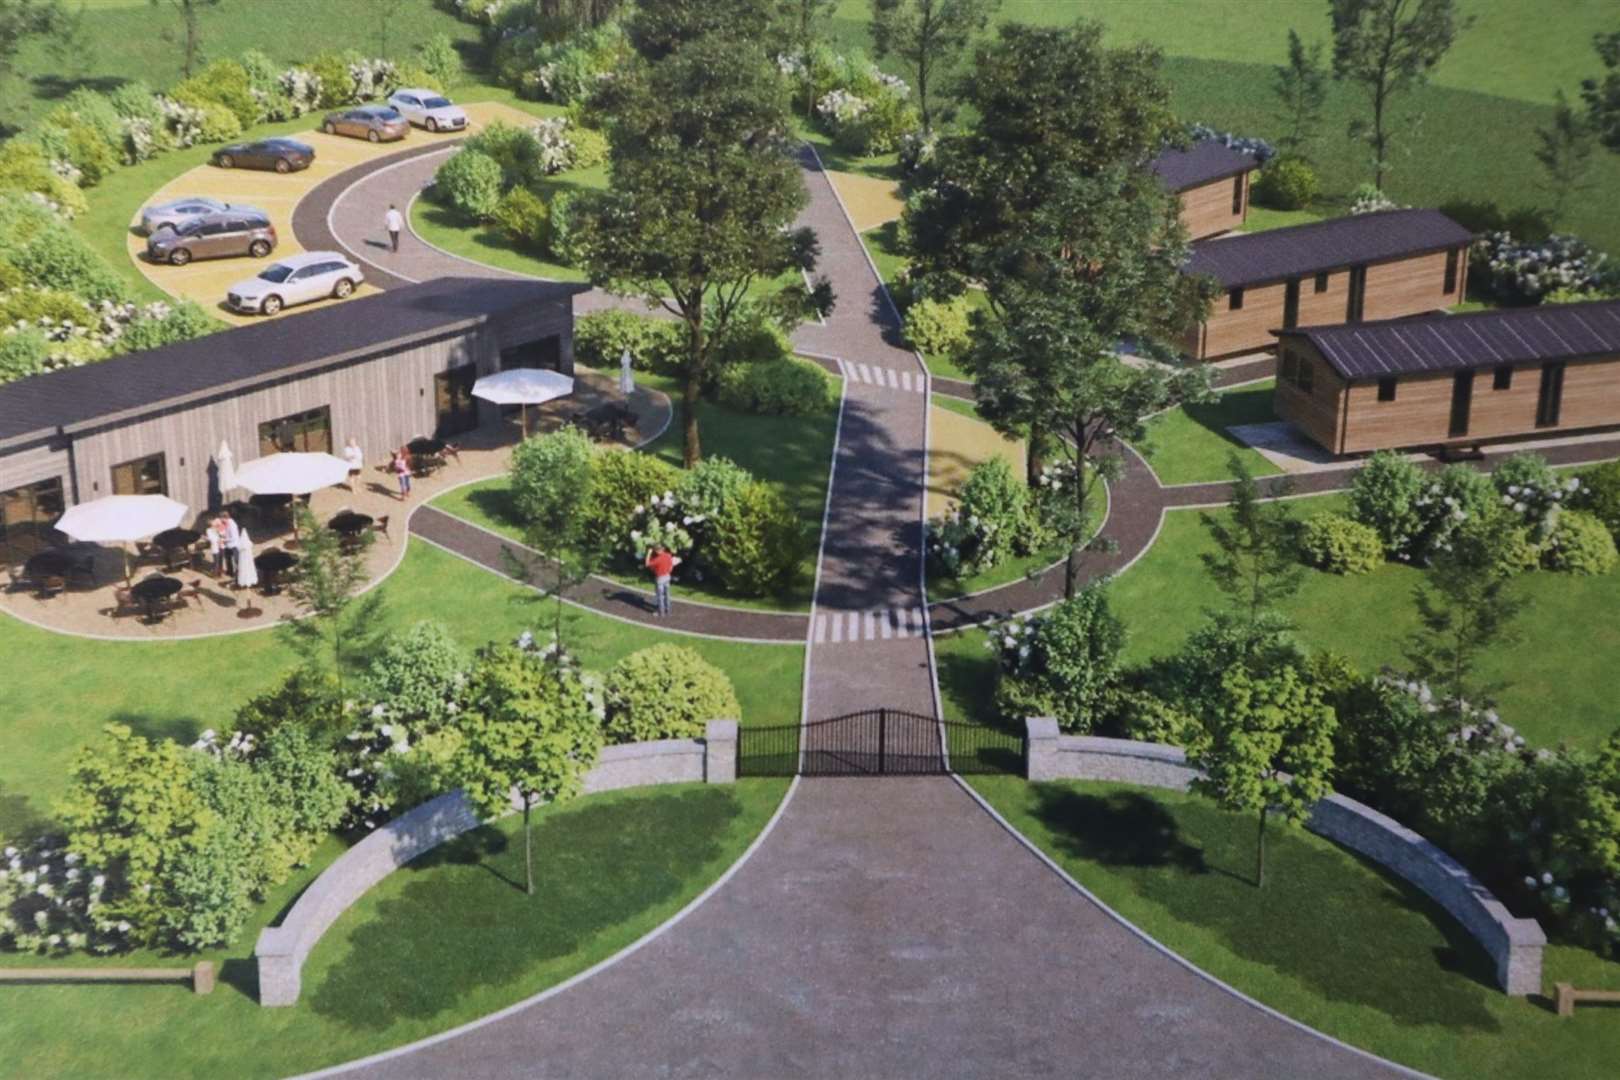 What the new Plough Lane entrance will look like at Golden Leas holiday park, Minster, Sheppey